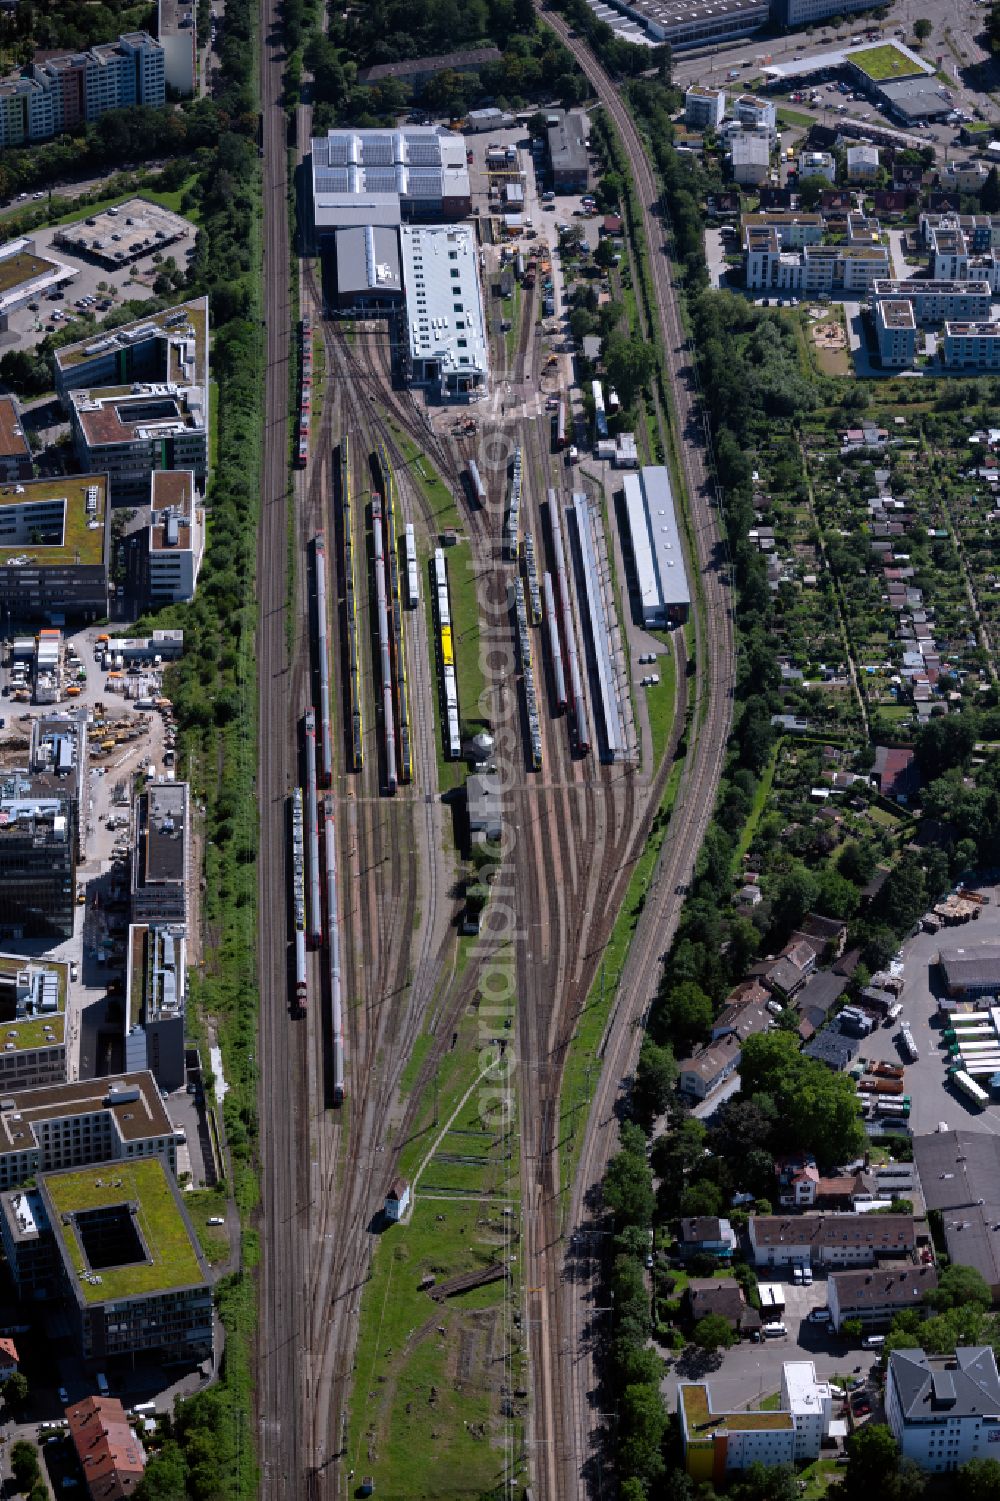 Freiburg im Breisgau from above - Railway track, depot, maintenance and repair shop for trains in the district Wiehre in Freiburg im Breisgau in the state Baden-Wurttemberg, Germany